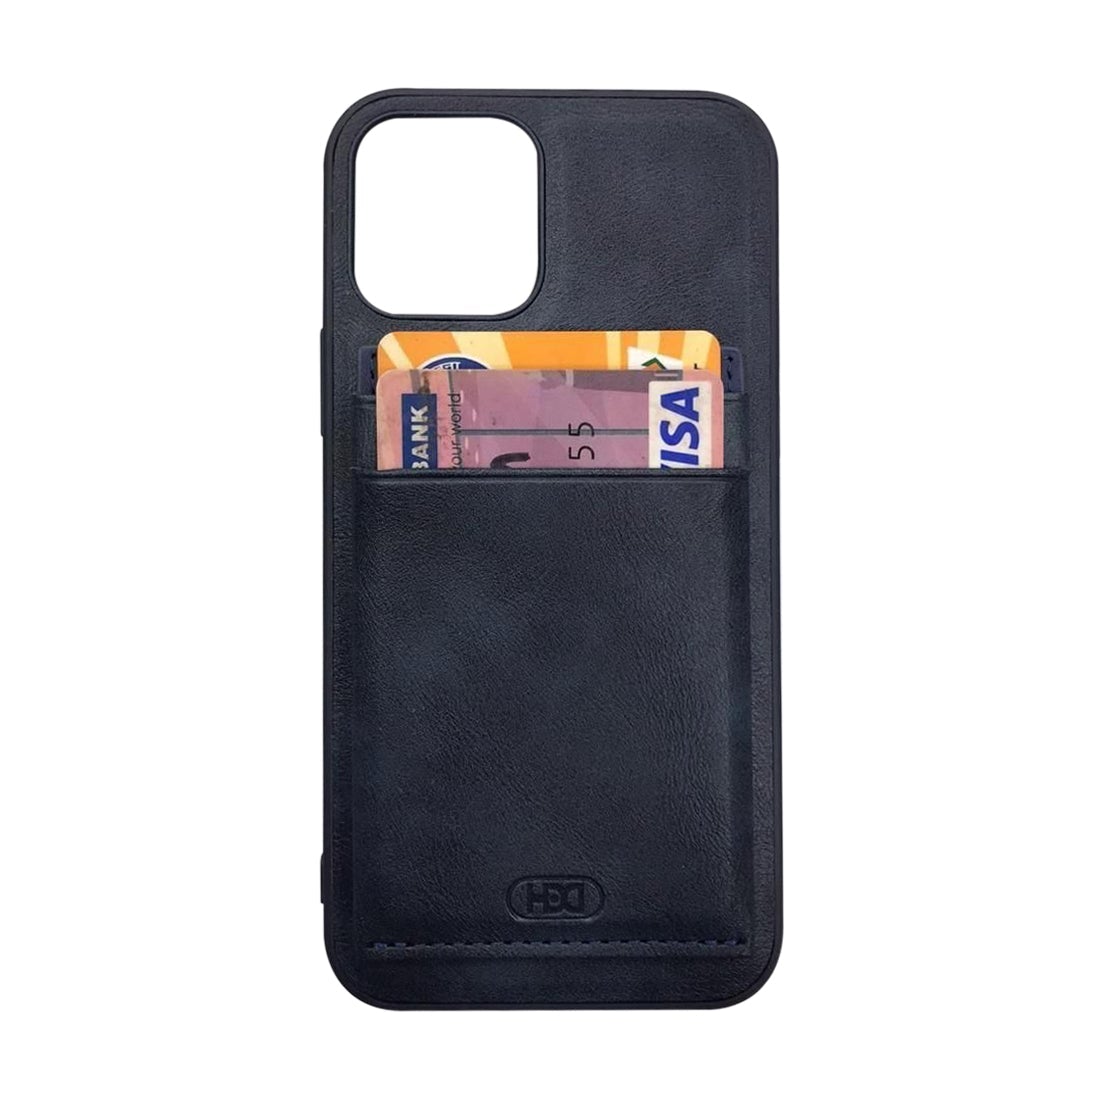 HBD Leather Wallet Case for iPhone - Navy Blue